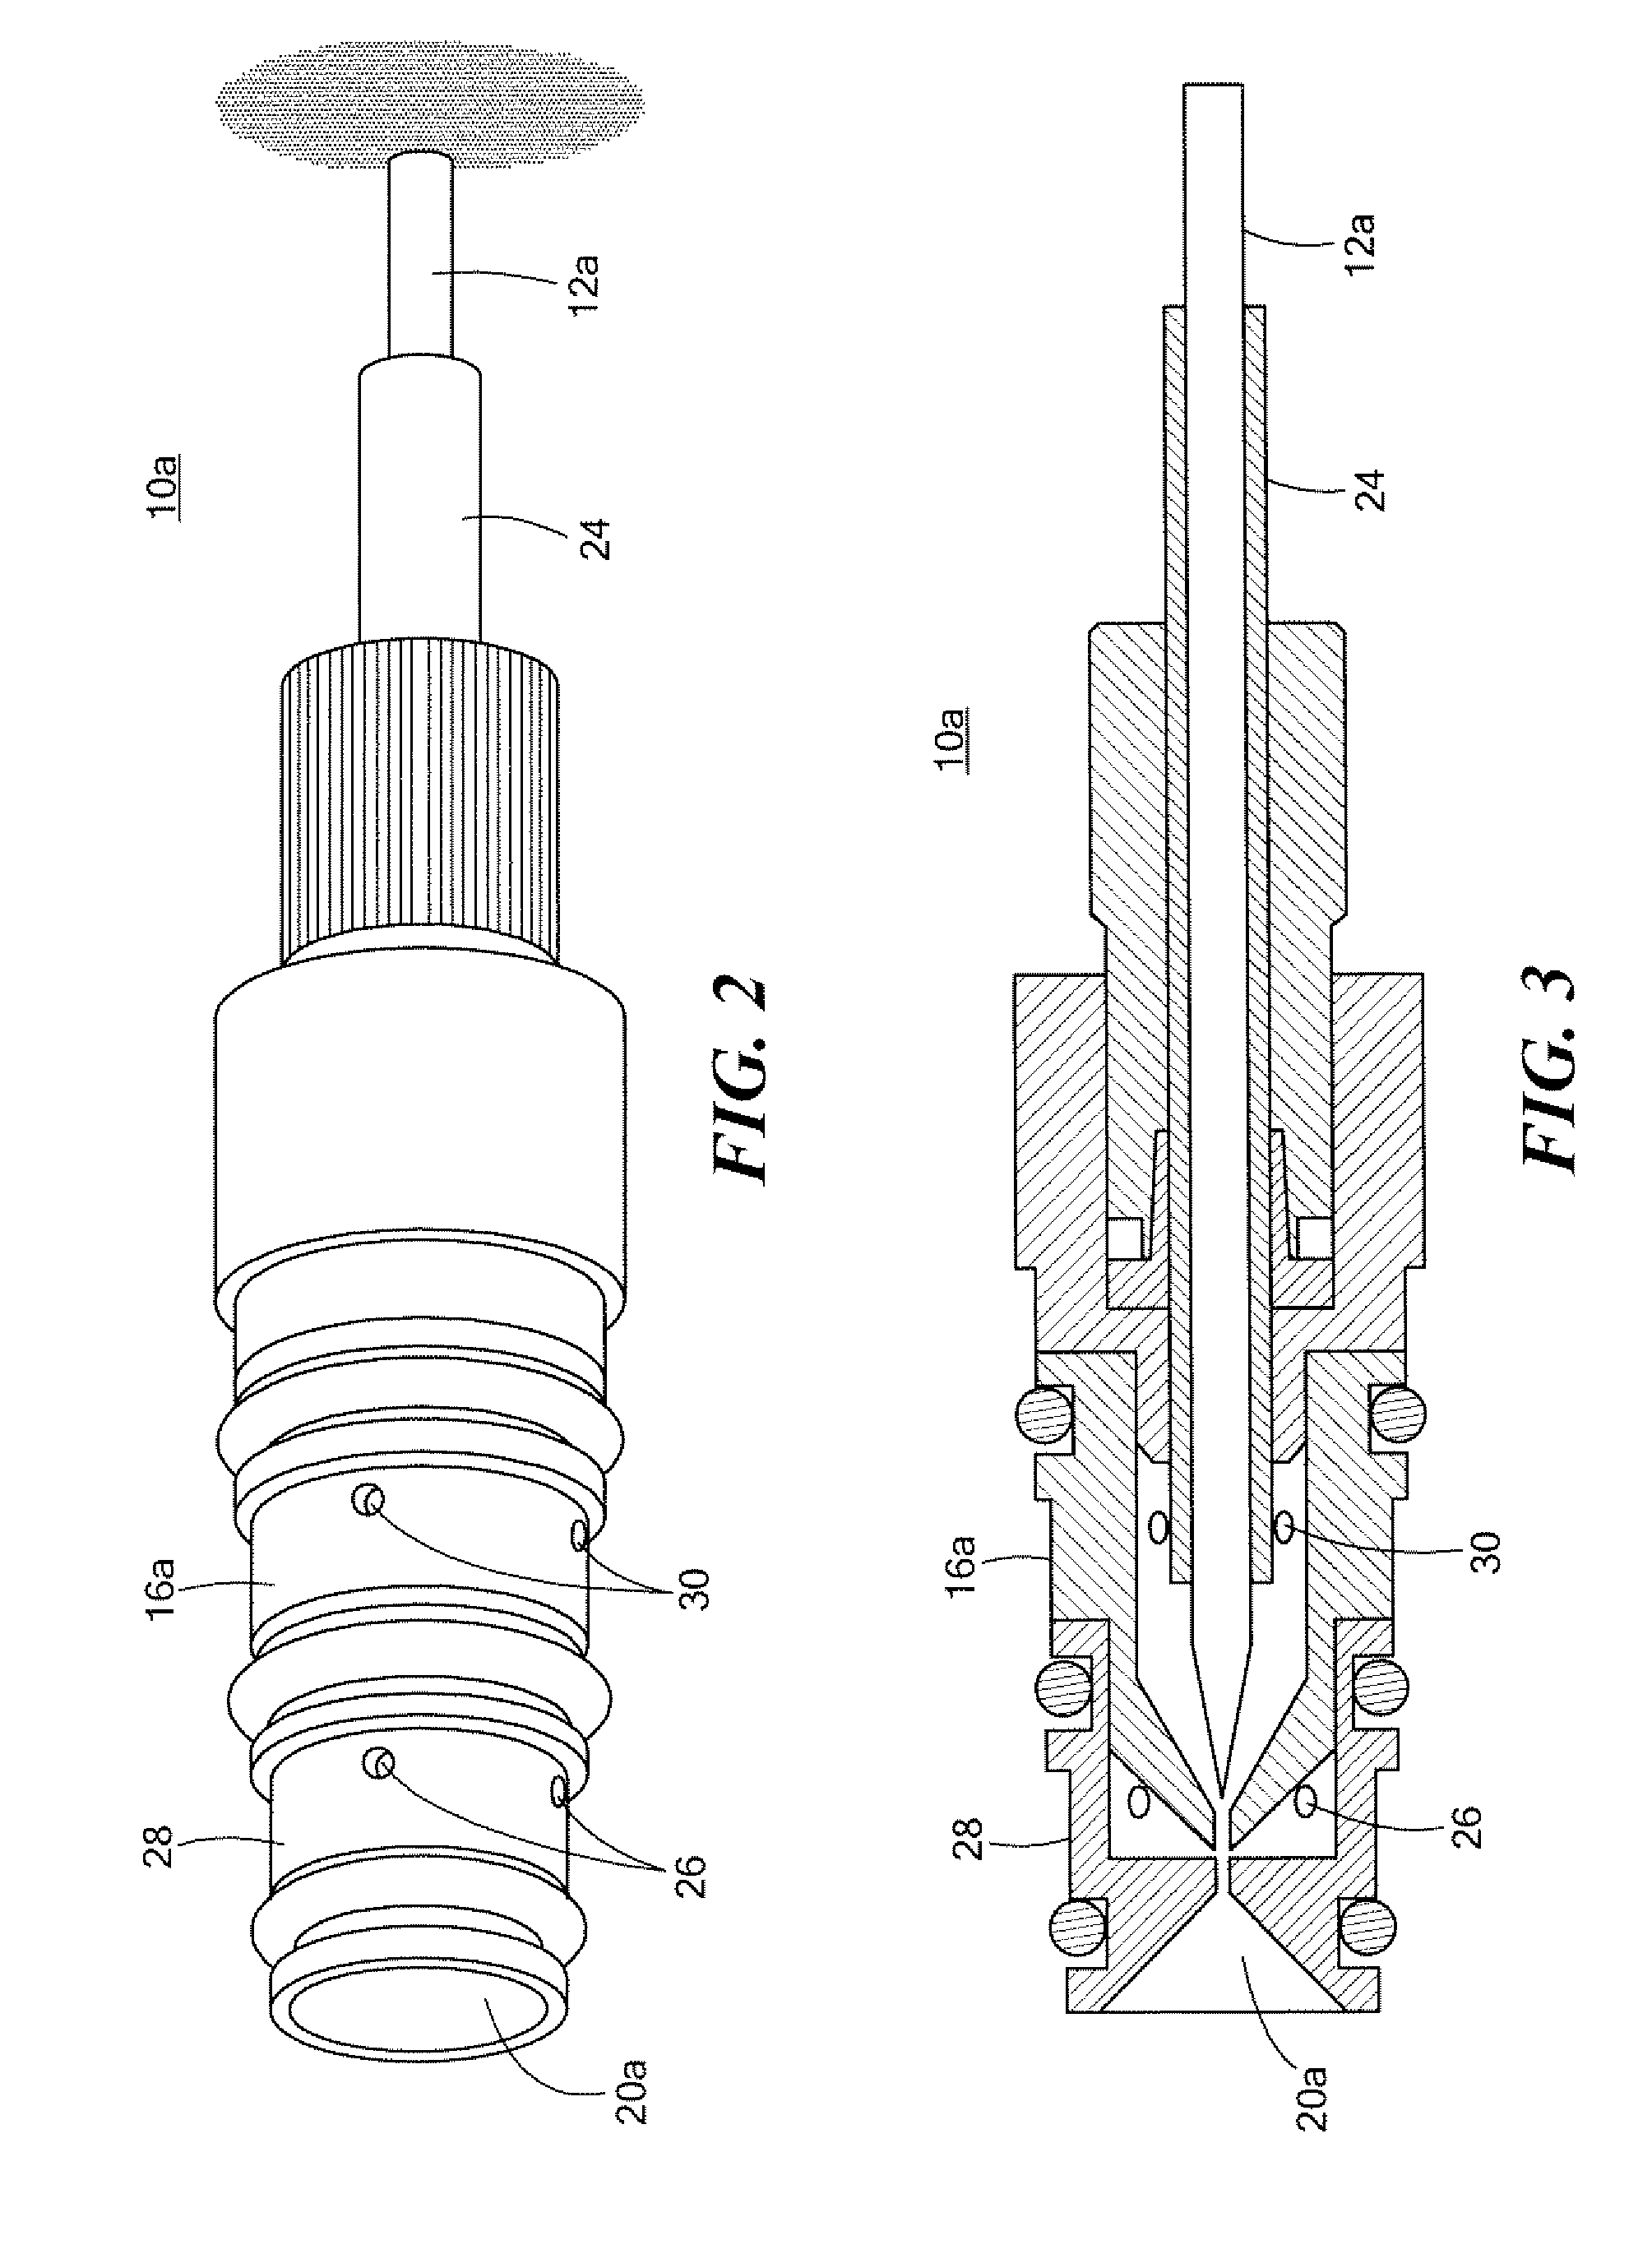 Charge injected fluid assist liquid atomizer